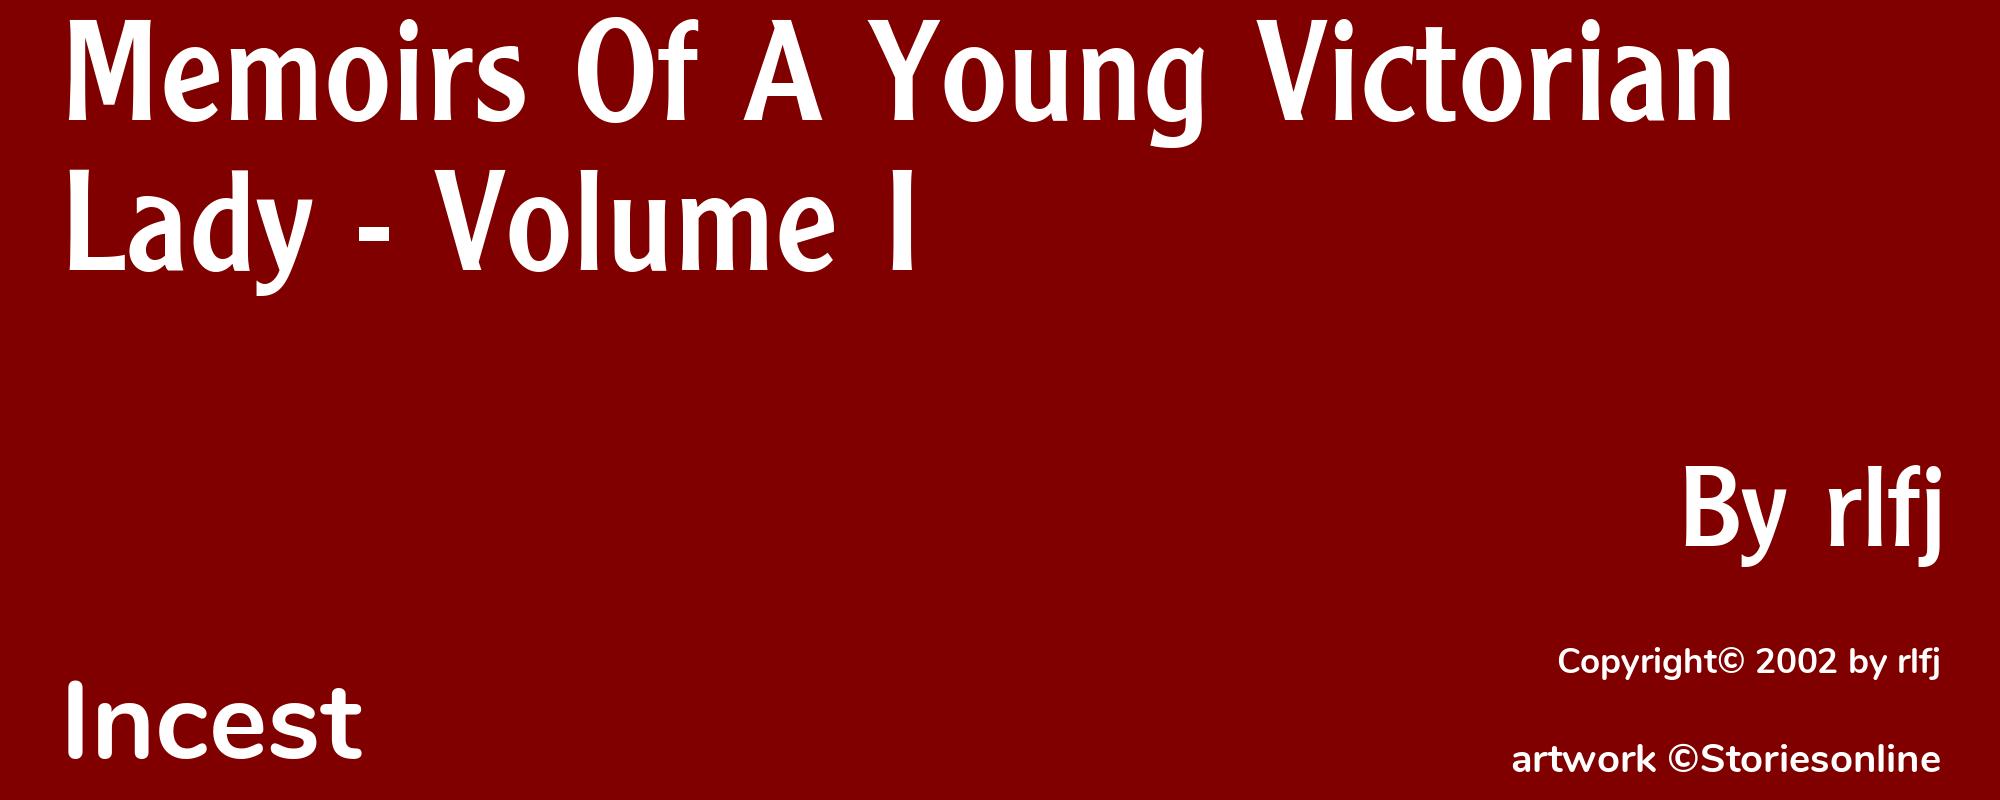 Memoirs Of A Young Victorian Lady - Volume I - Cover